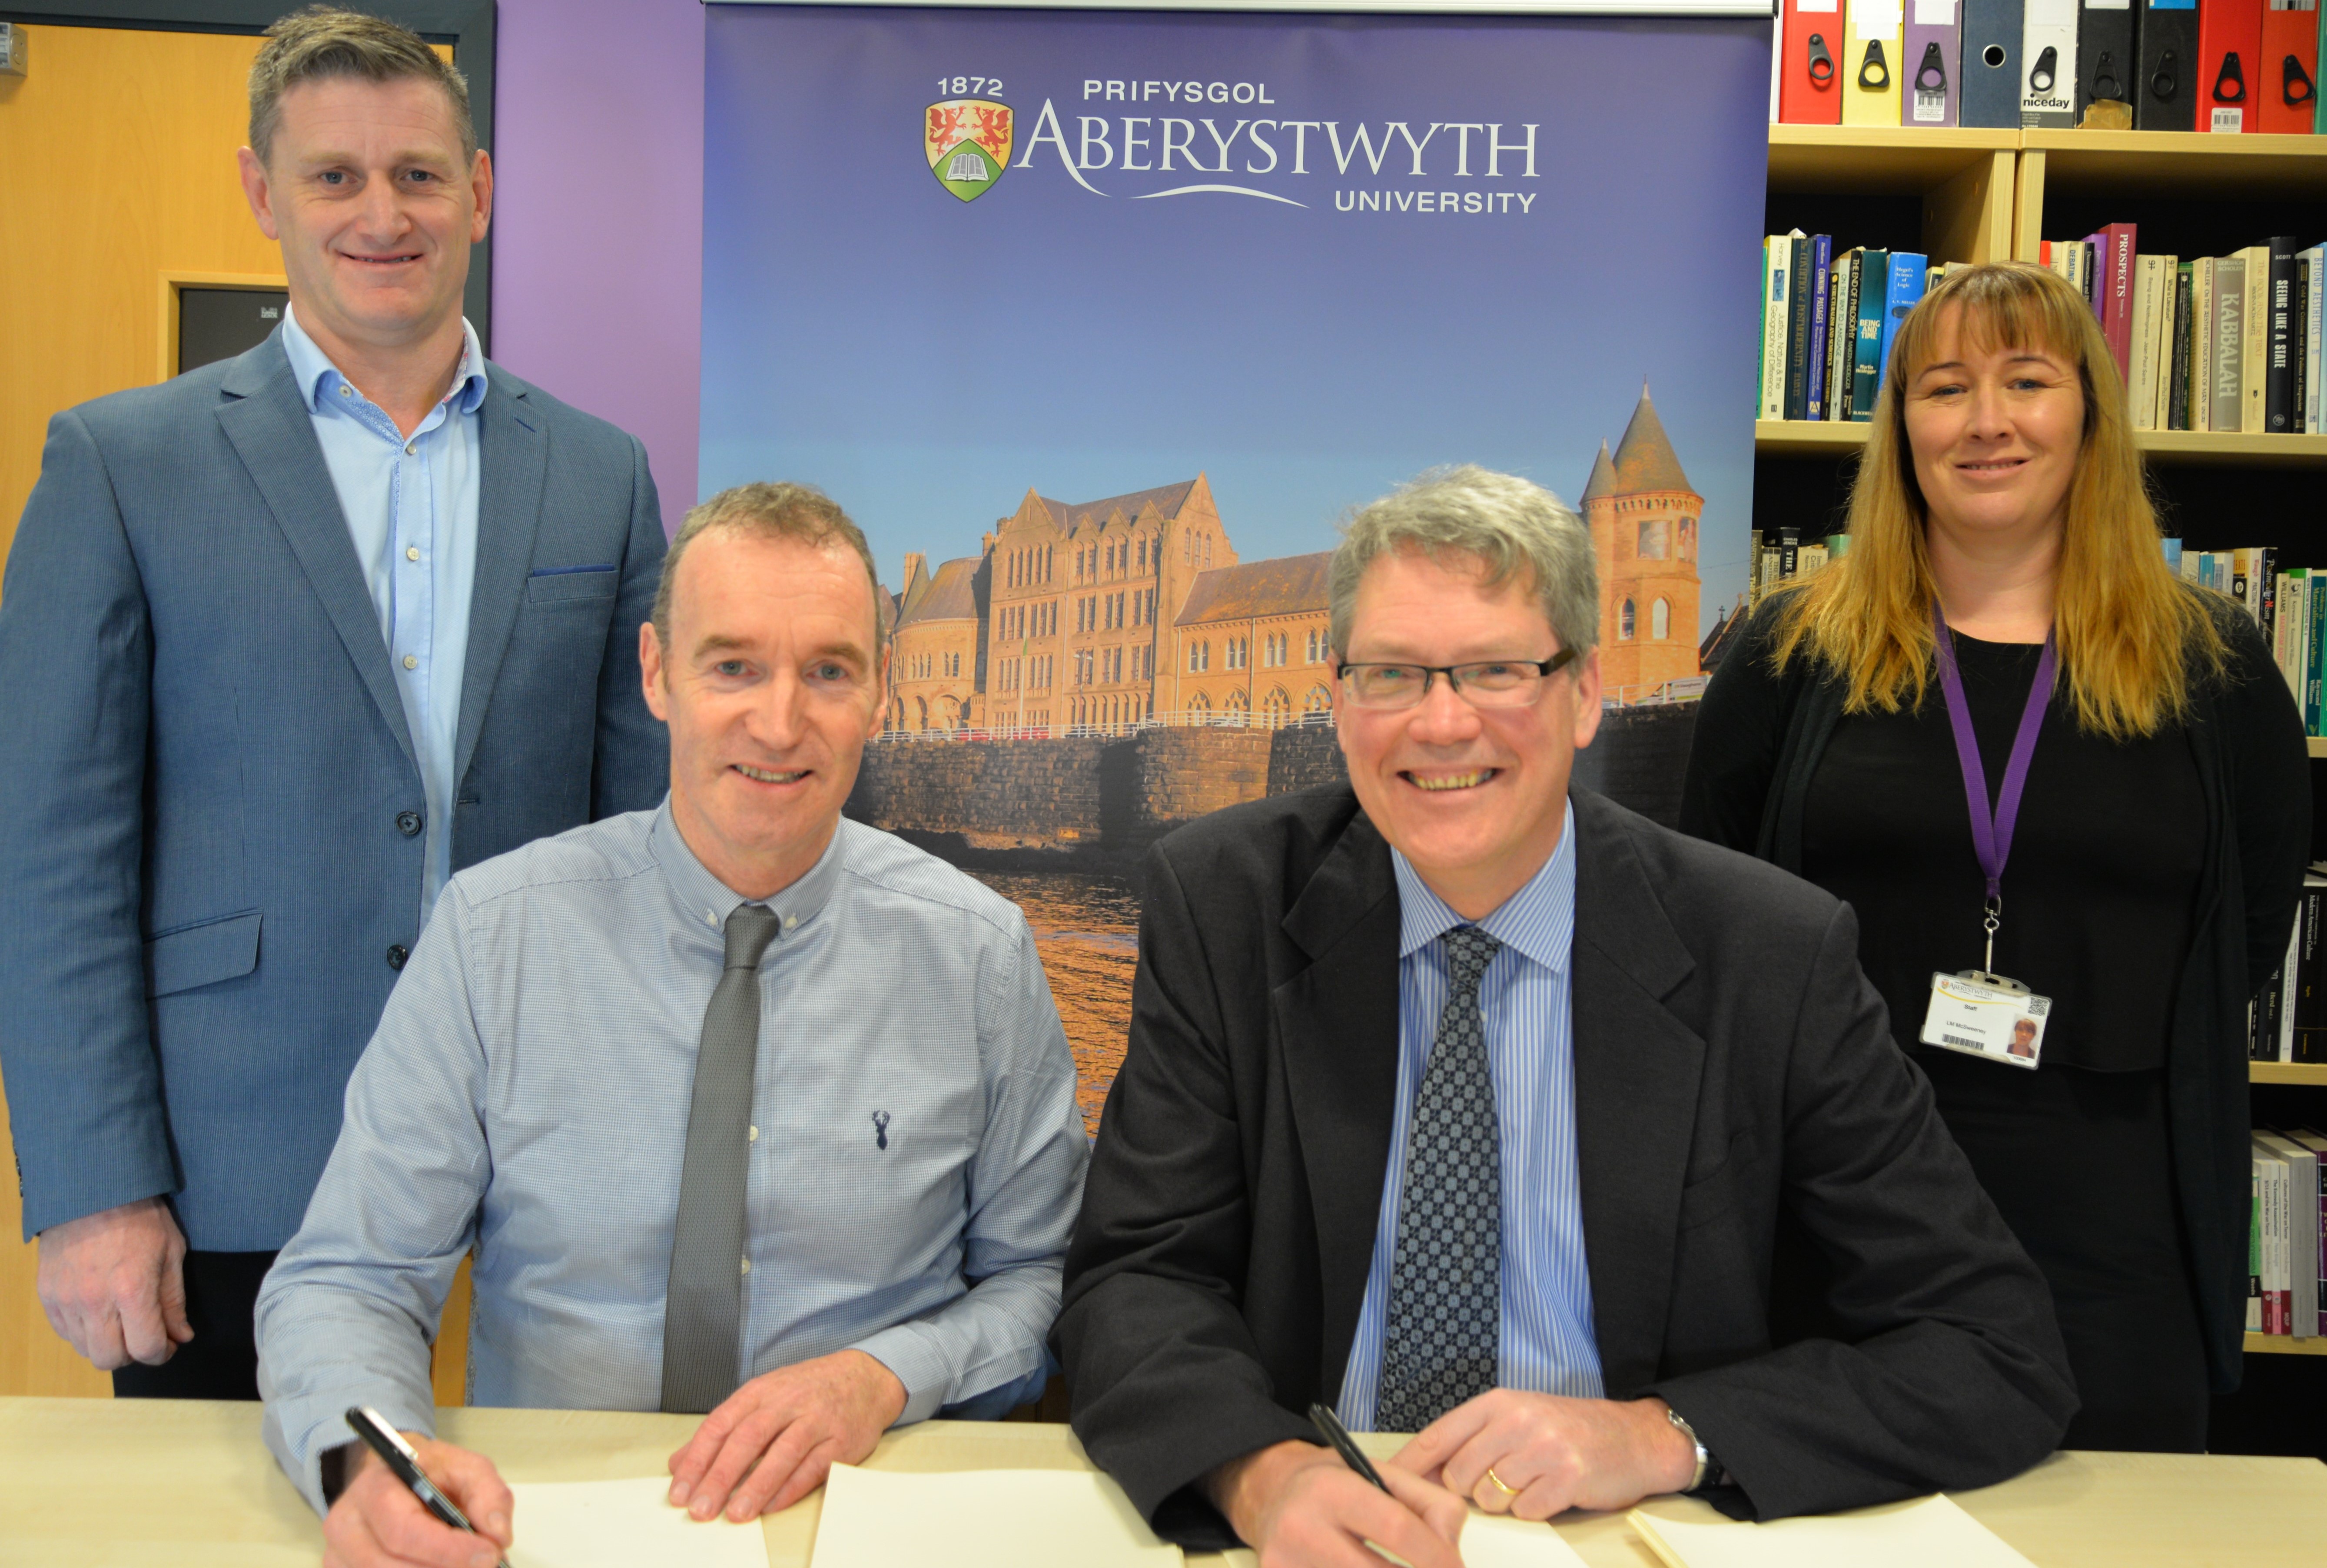 From left to right: Dr Wyn Morris, Alun Jones, Professor Tim Woods and Laura McSweeney signing the new contract.